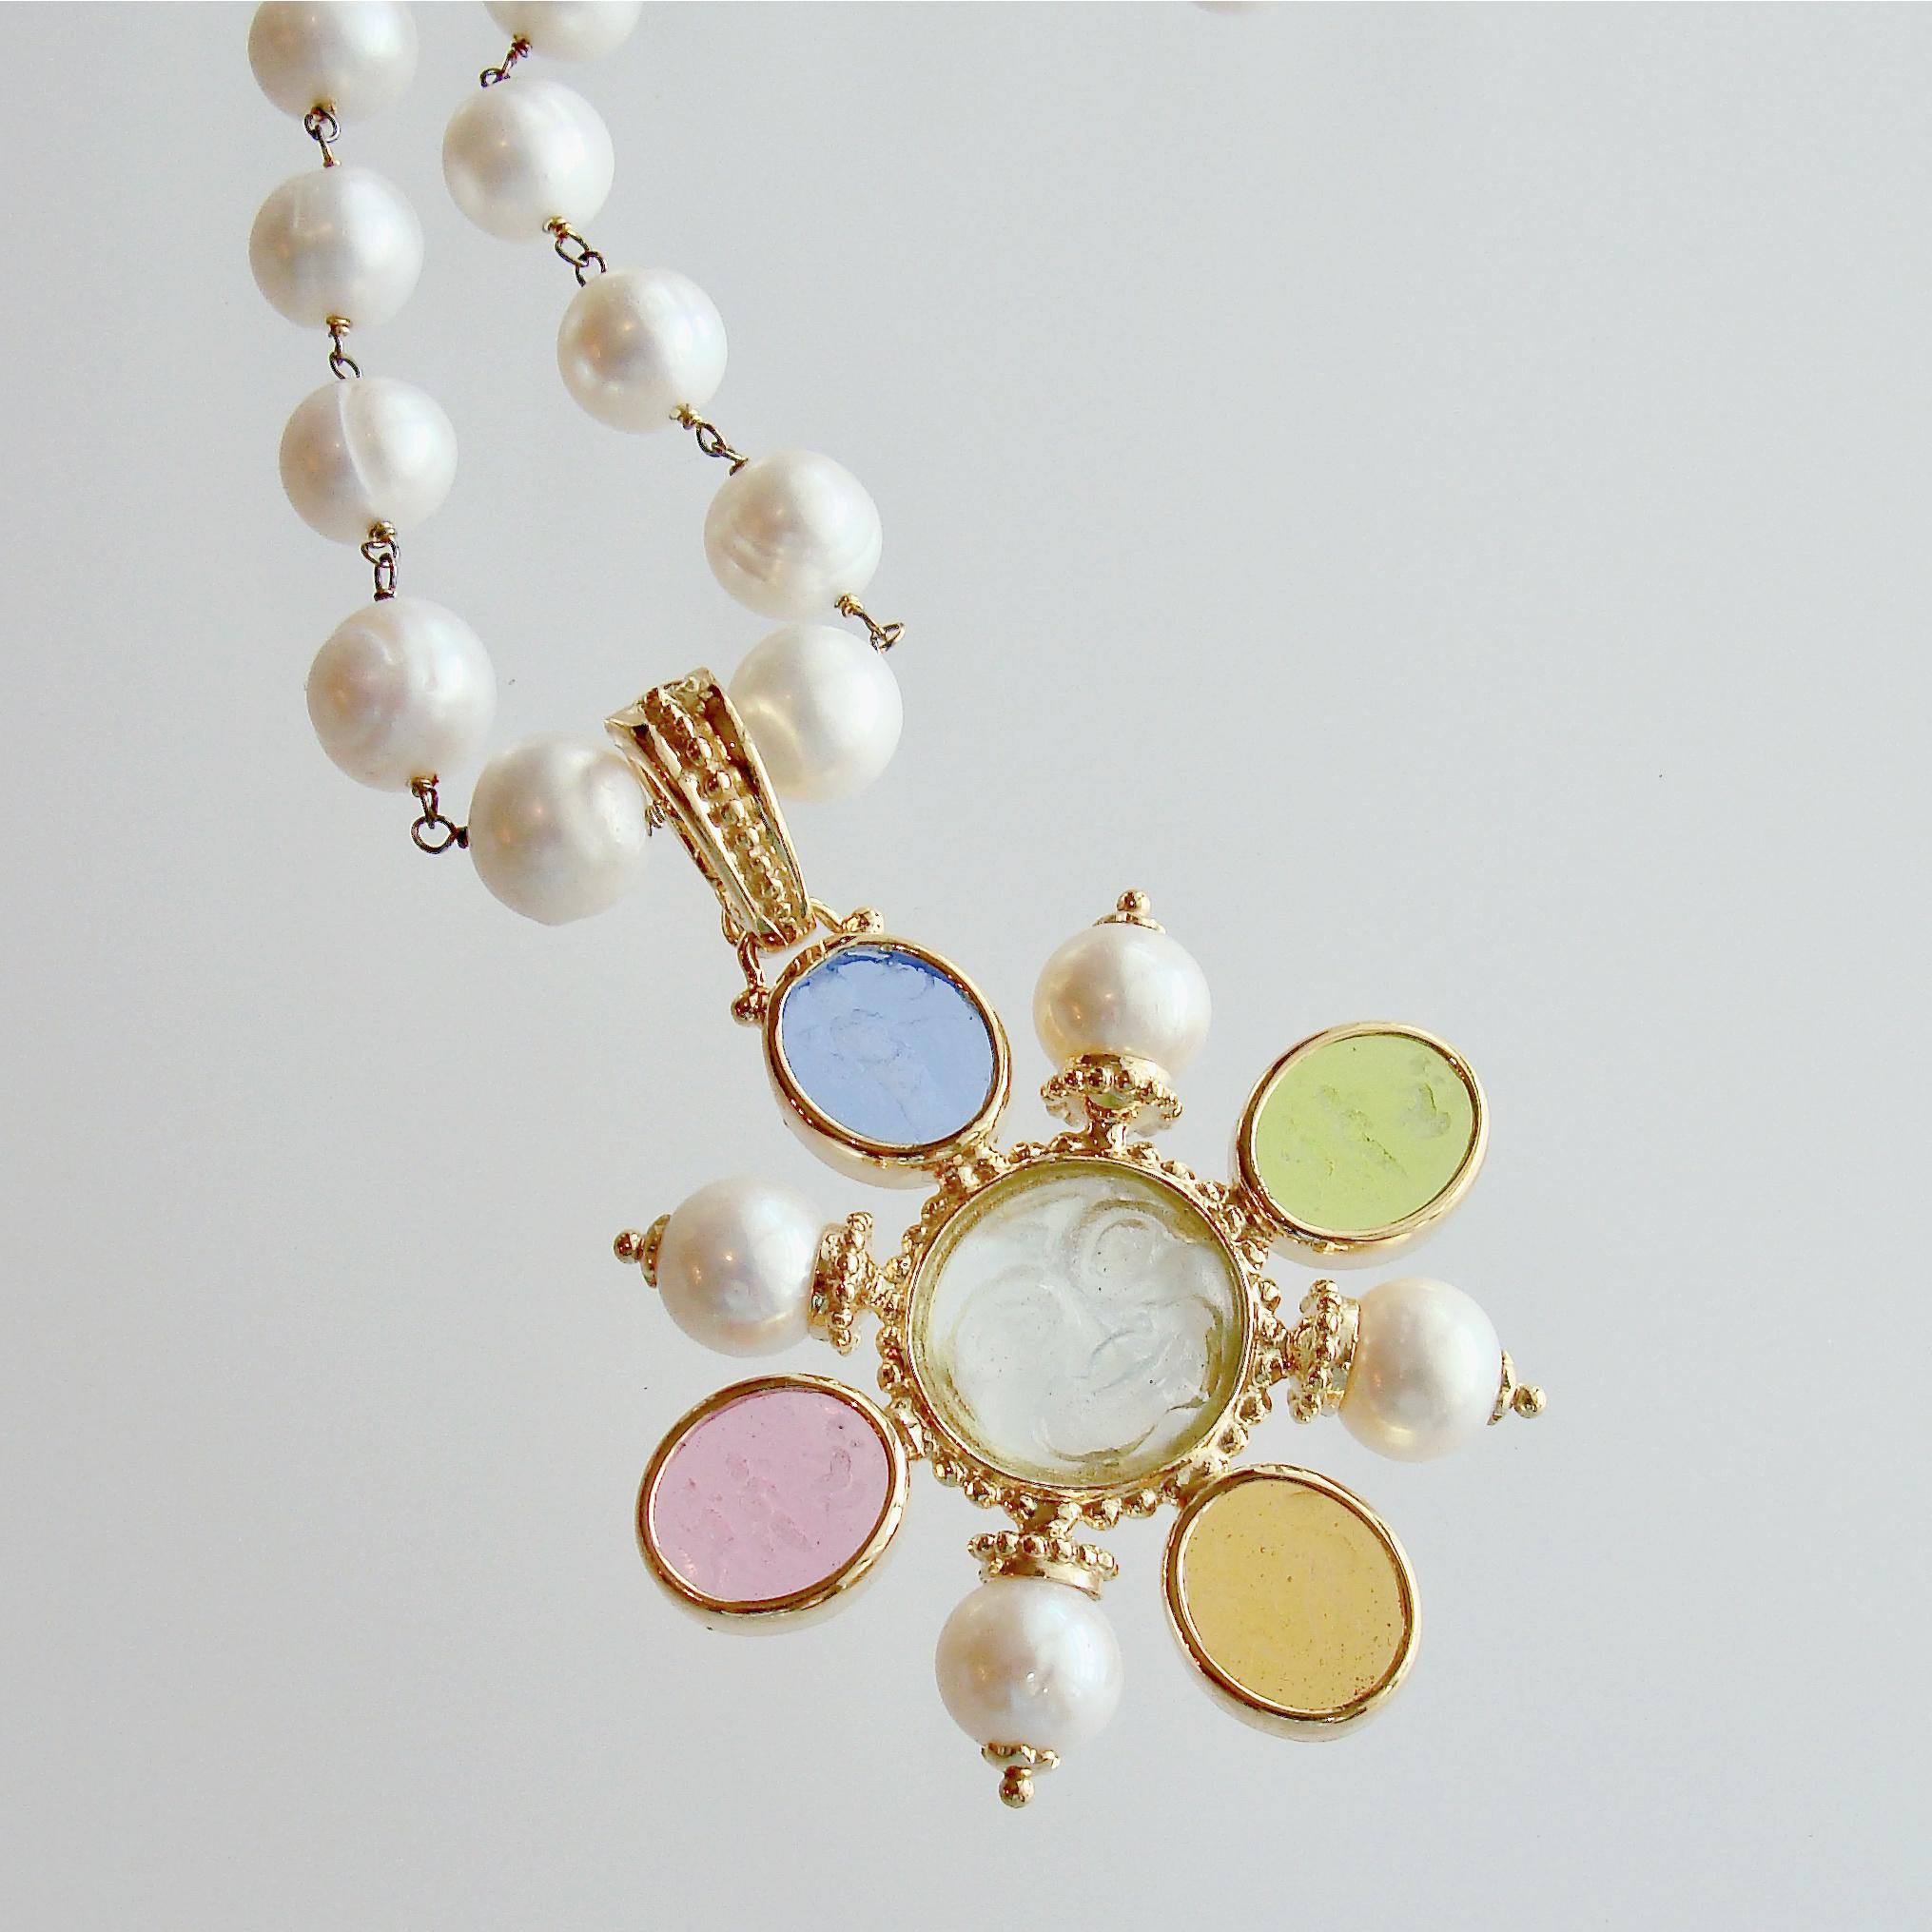 Basiglio Necklace.

This jaw dropping Venetian glass intaglio necklace, in a rainbow of stunning pastels, has been discreetly married to a simple freshwater pearl chain to echo the luxe and wealthy style of the Basiglio area of Italy.  Perfect for